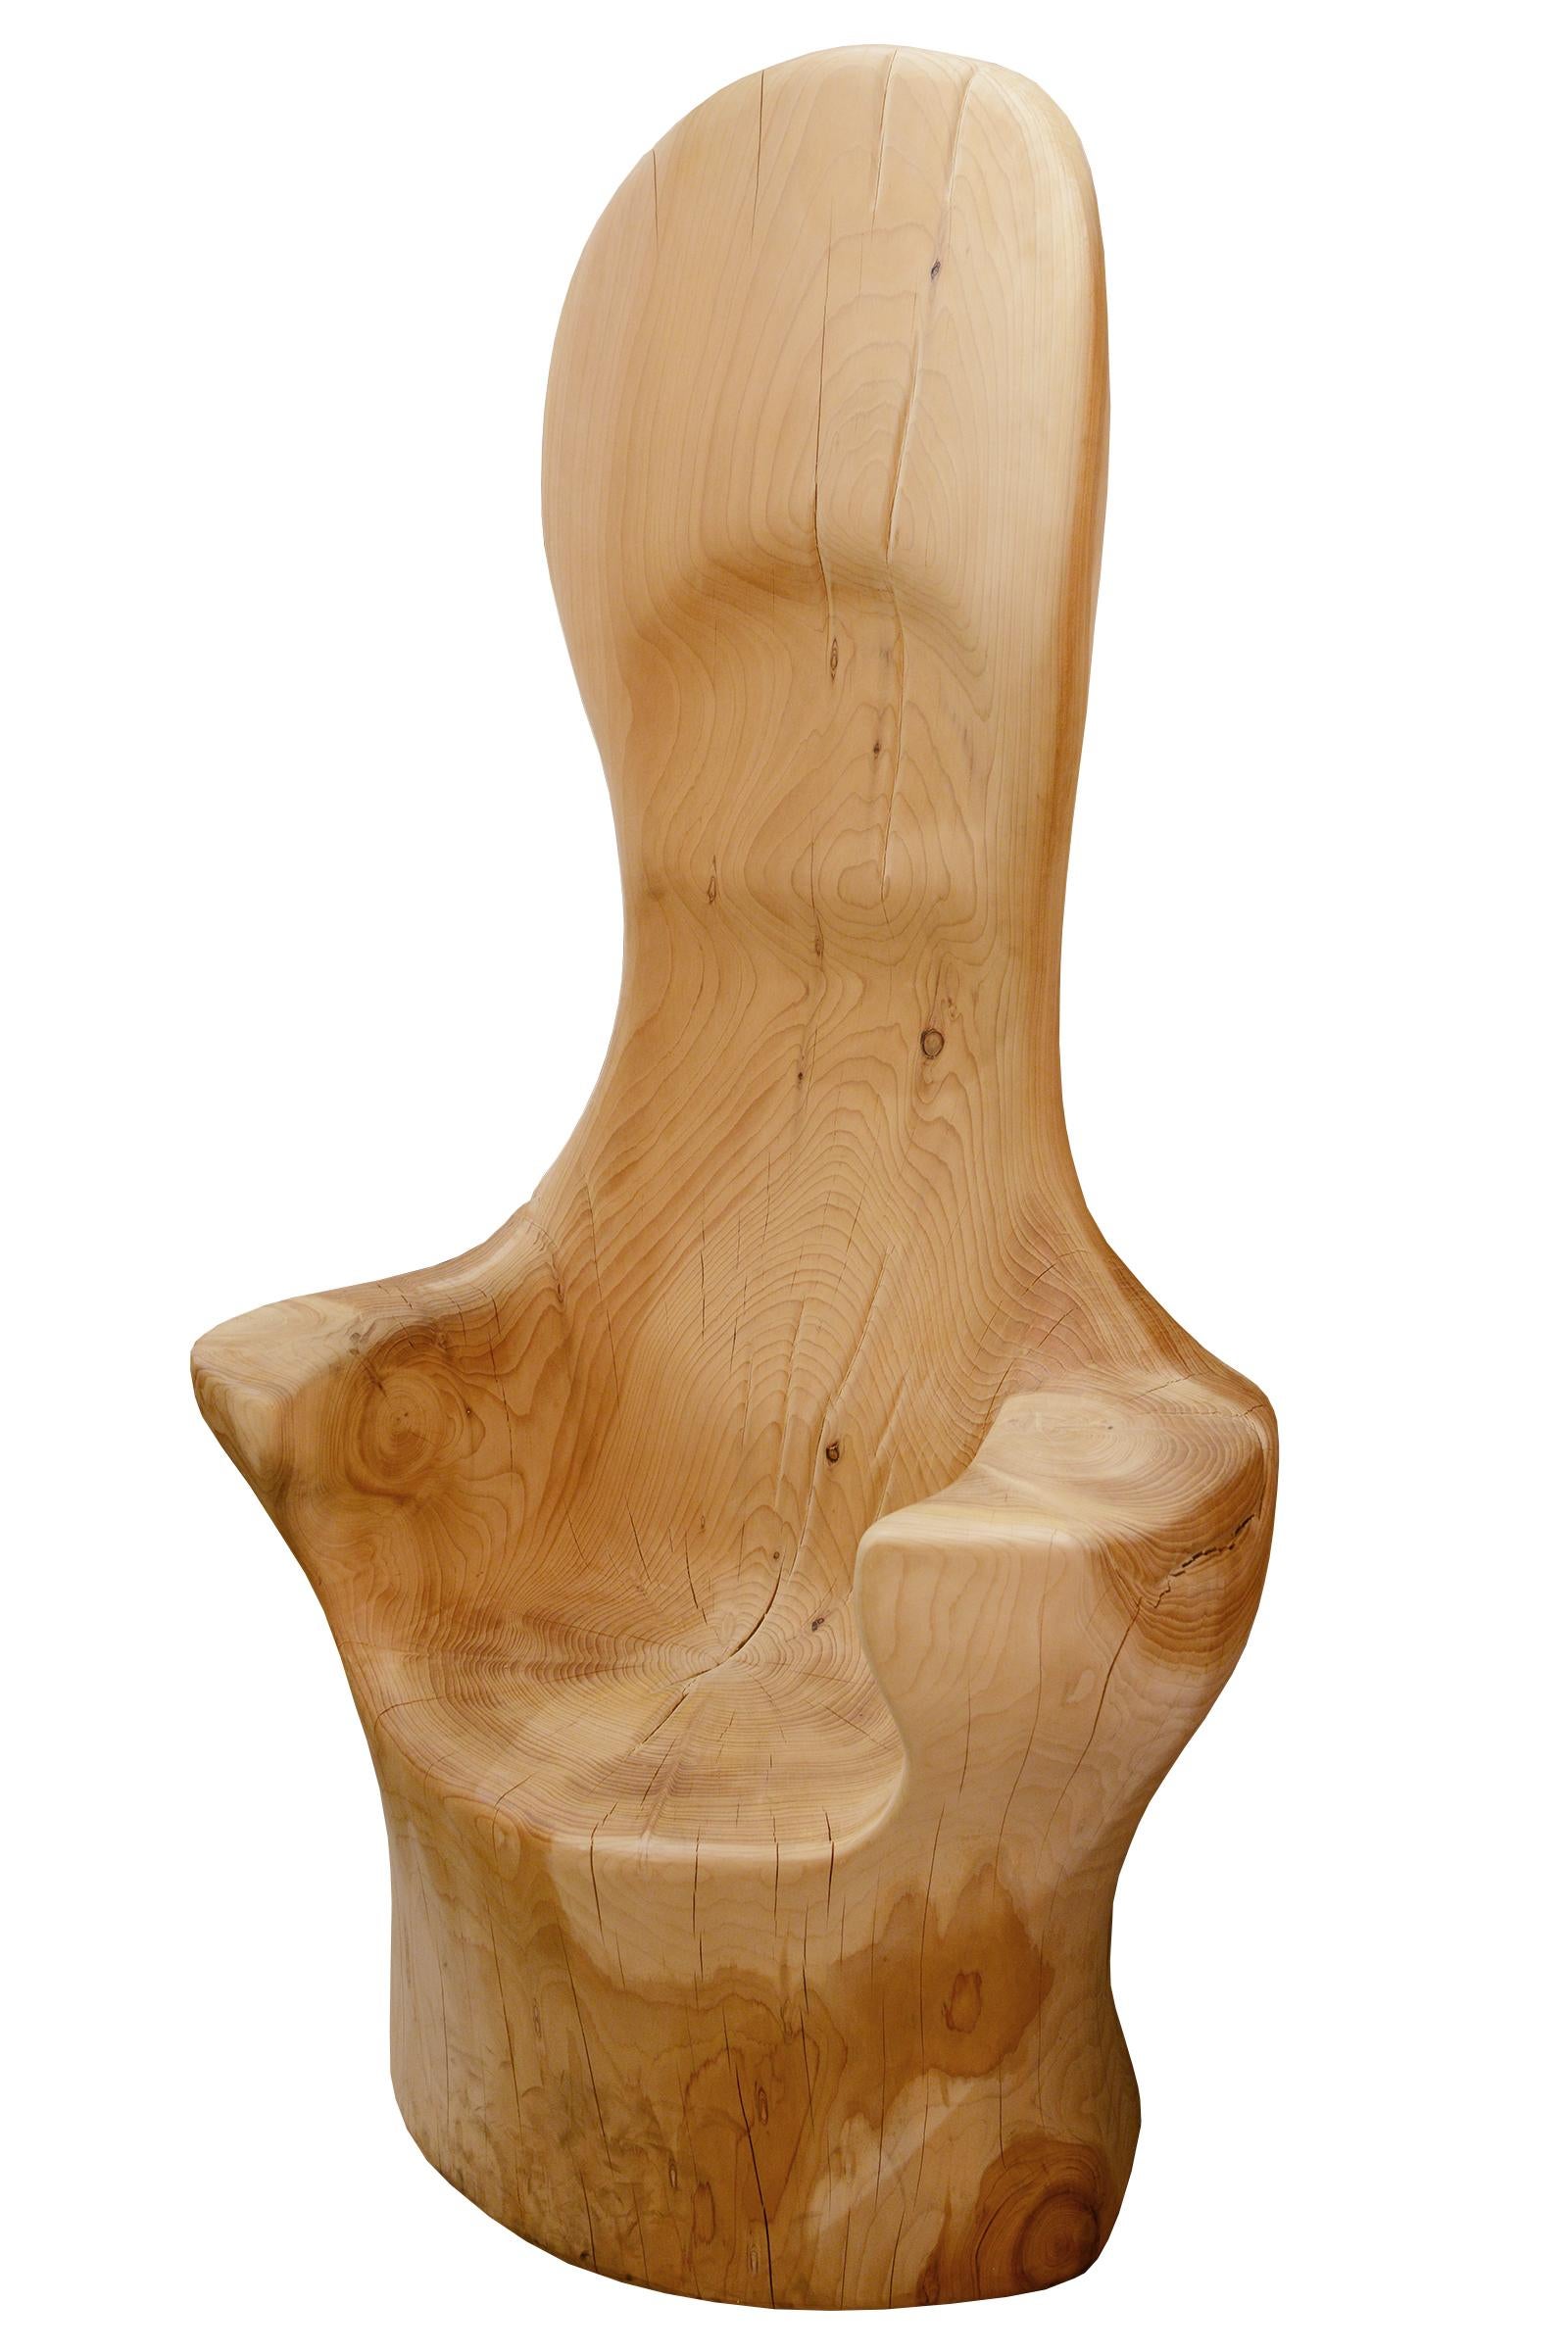 Throne Cedar high made with natural raw cedar wood,
hand carved from a death cedar tree trunk, hand-
polished and naturally treated to have the cedar
essence smell. Exceptional and unique piece.
Made in France in 2021.
Solid cedar wood include